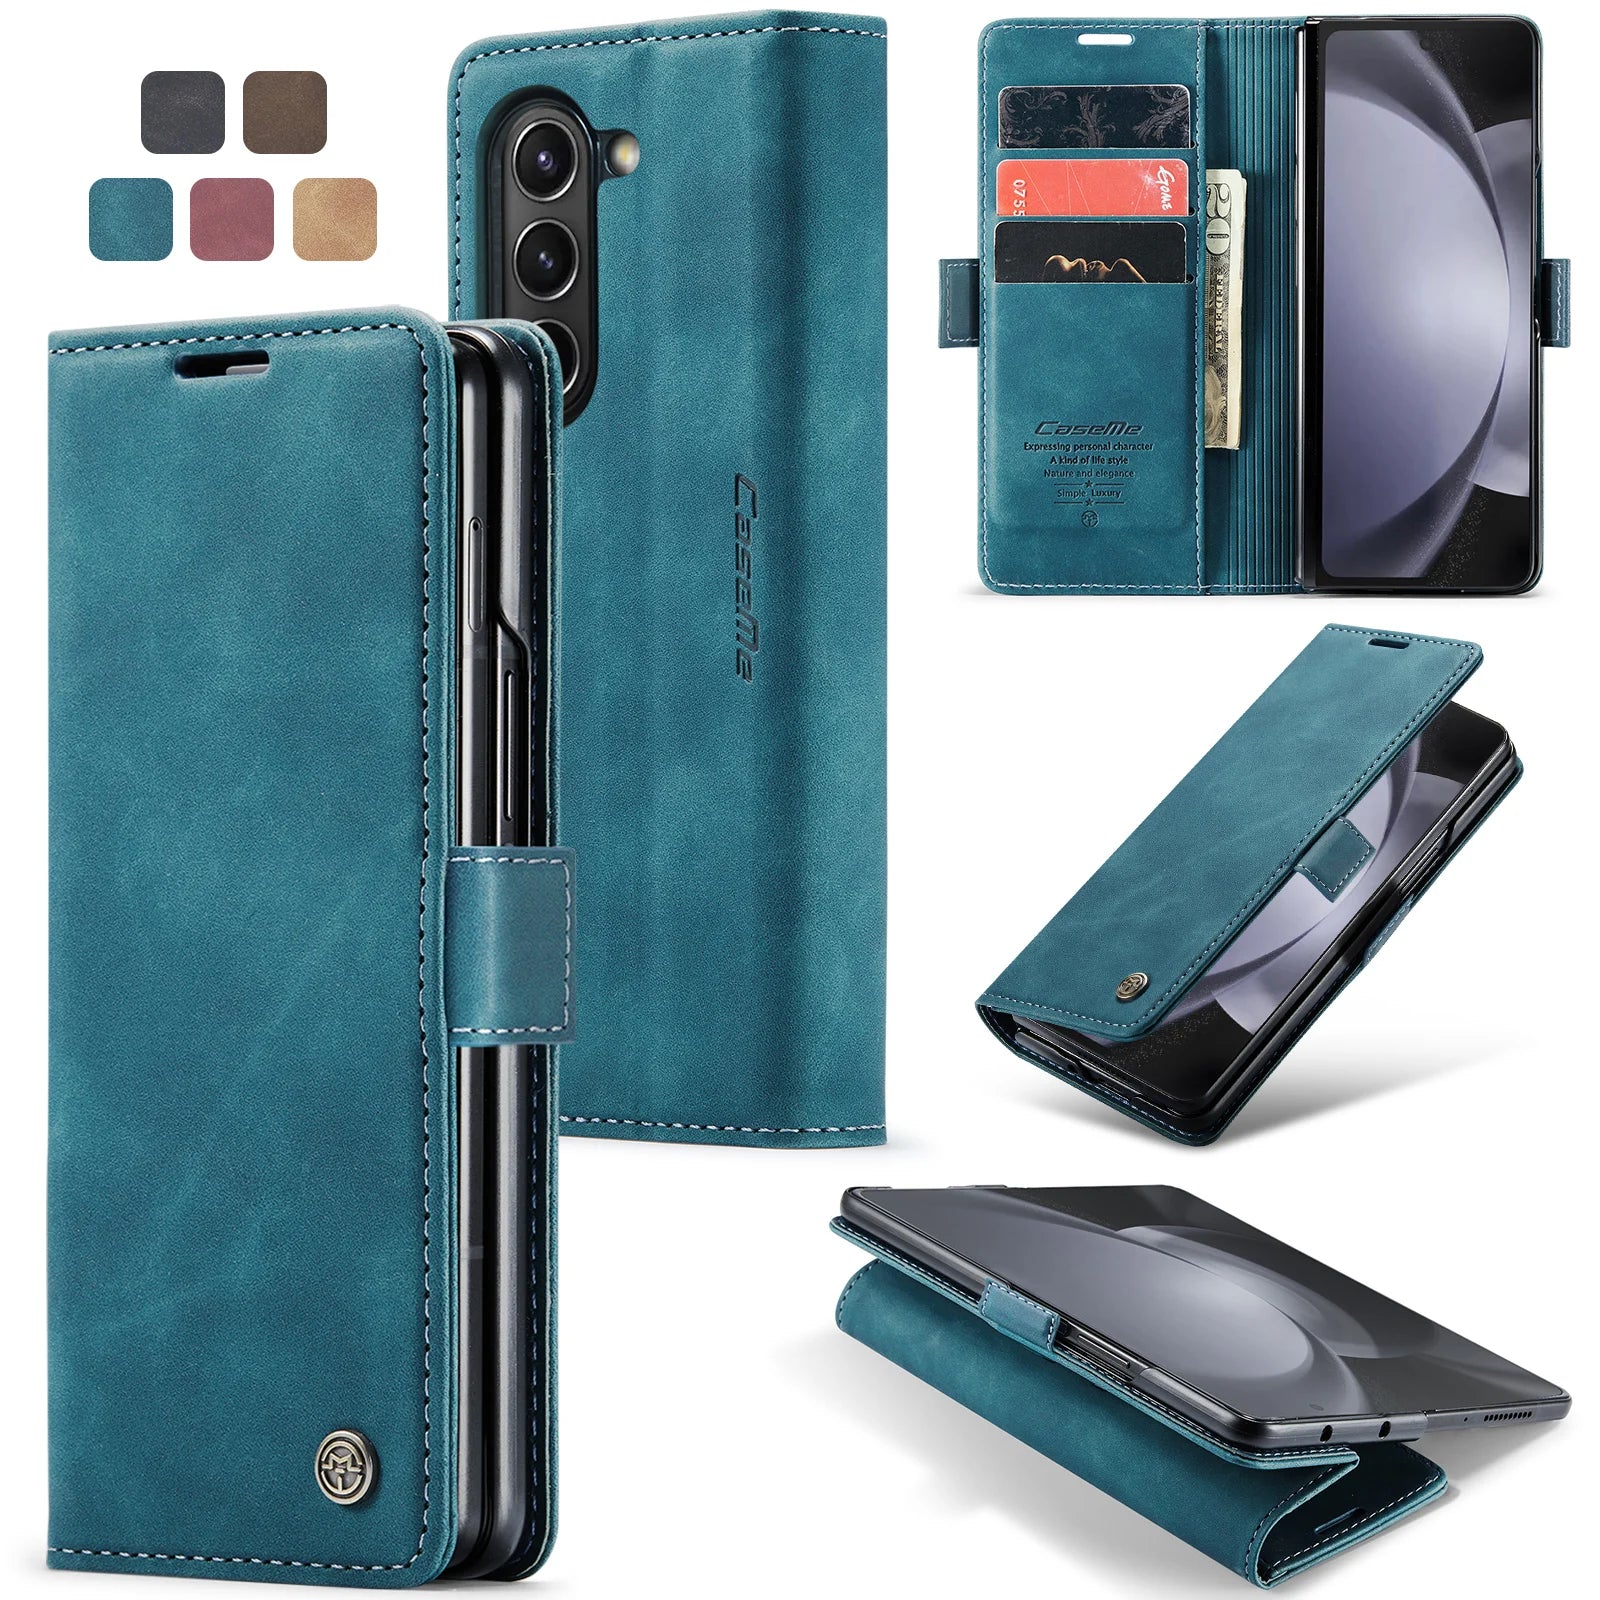 Matte Card Slot Magnetic Stand Wallet Leather Galaxy Z Fold Case - DealJustDeal